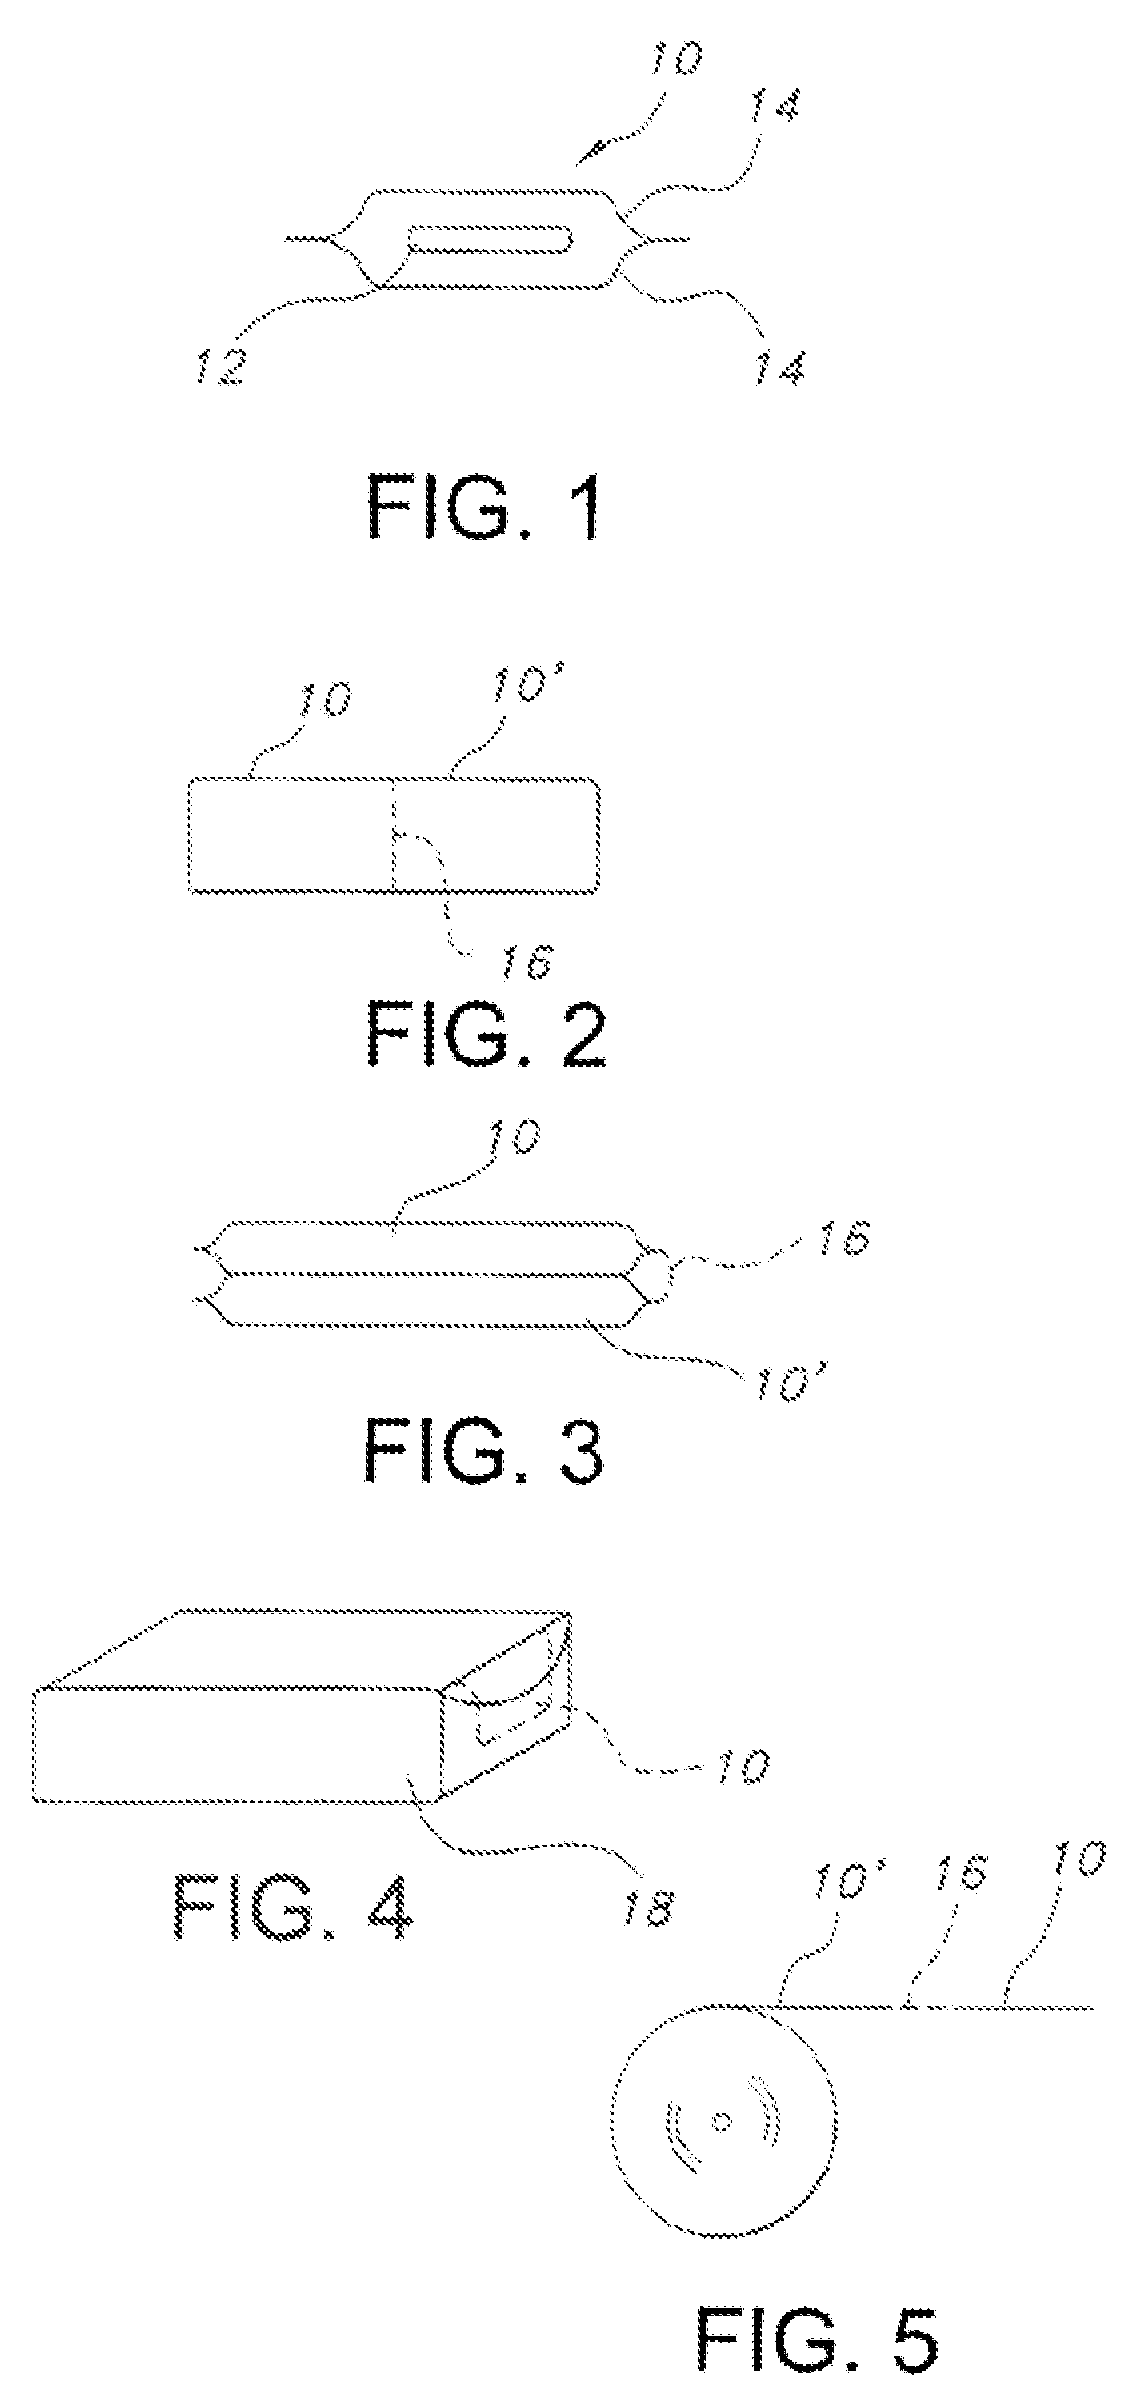 Edible Water-Soluble Film Containing a Foam Reducing Flavoring Agent